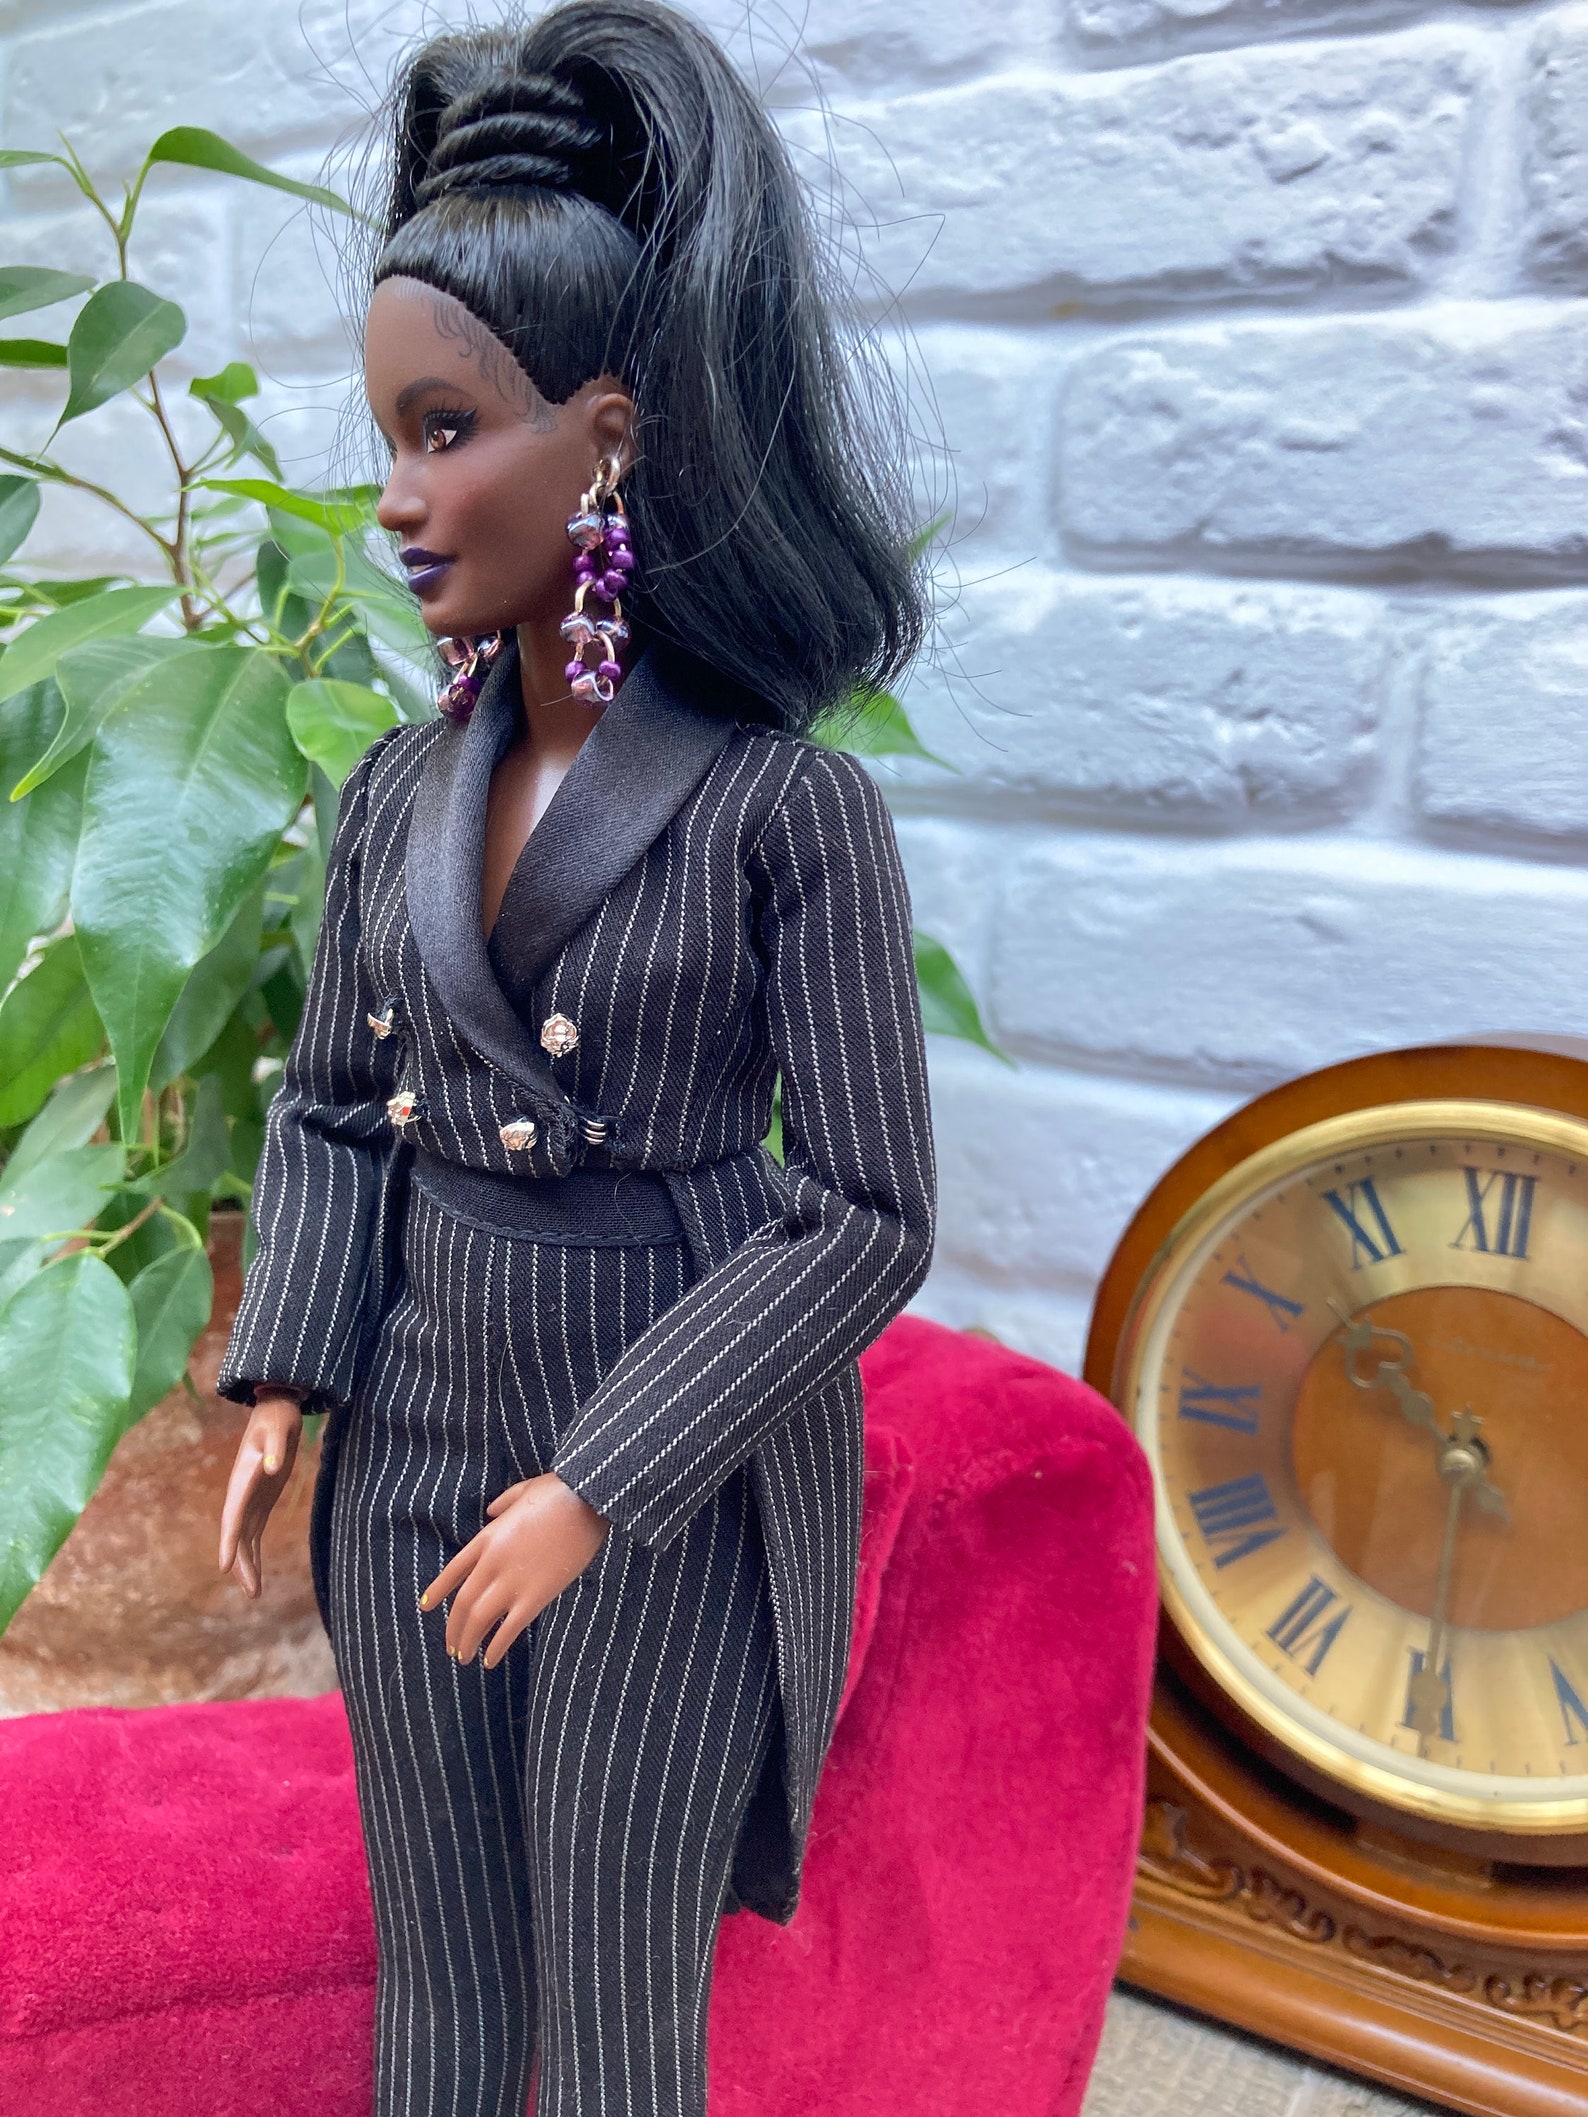 Black Tailcoat and Pants for Curvy Barbie Doll - Etsy